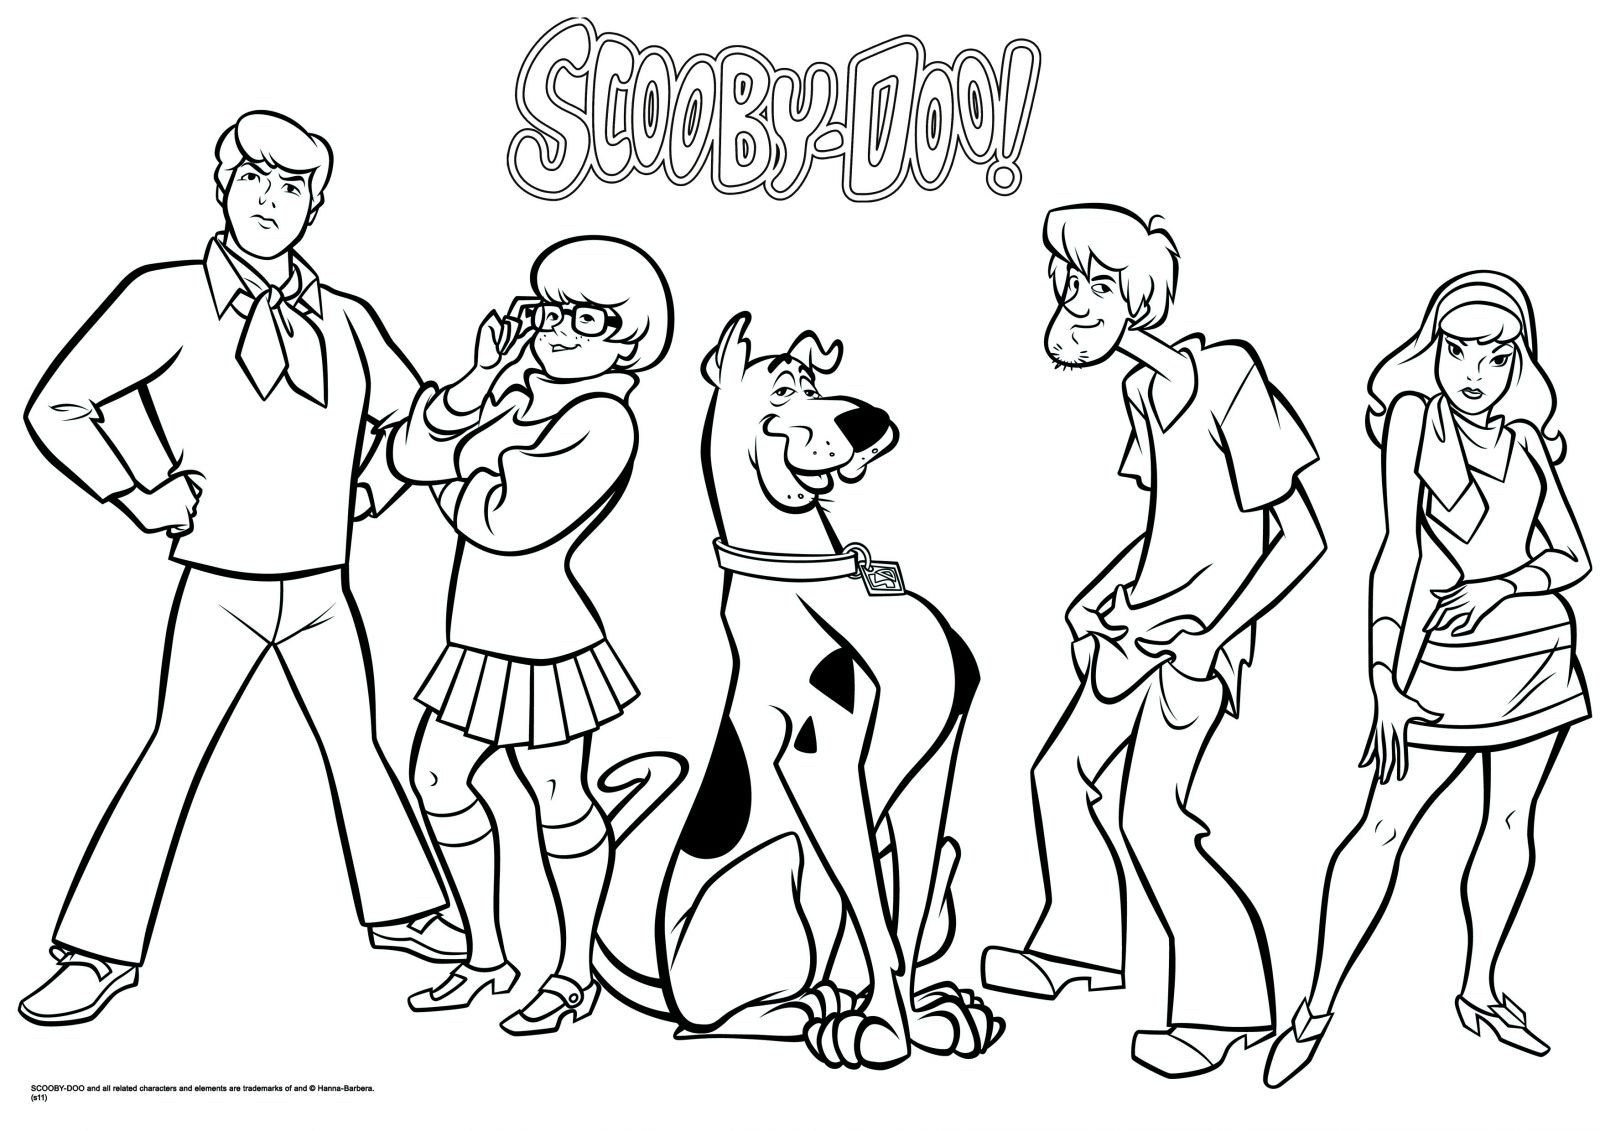 Scooby Doo Coloring Pages To Print at GetDrawings | Free ...